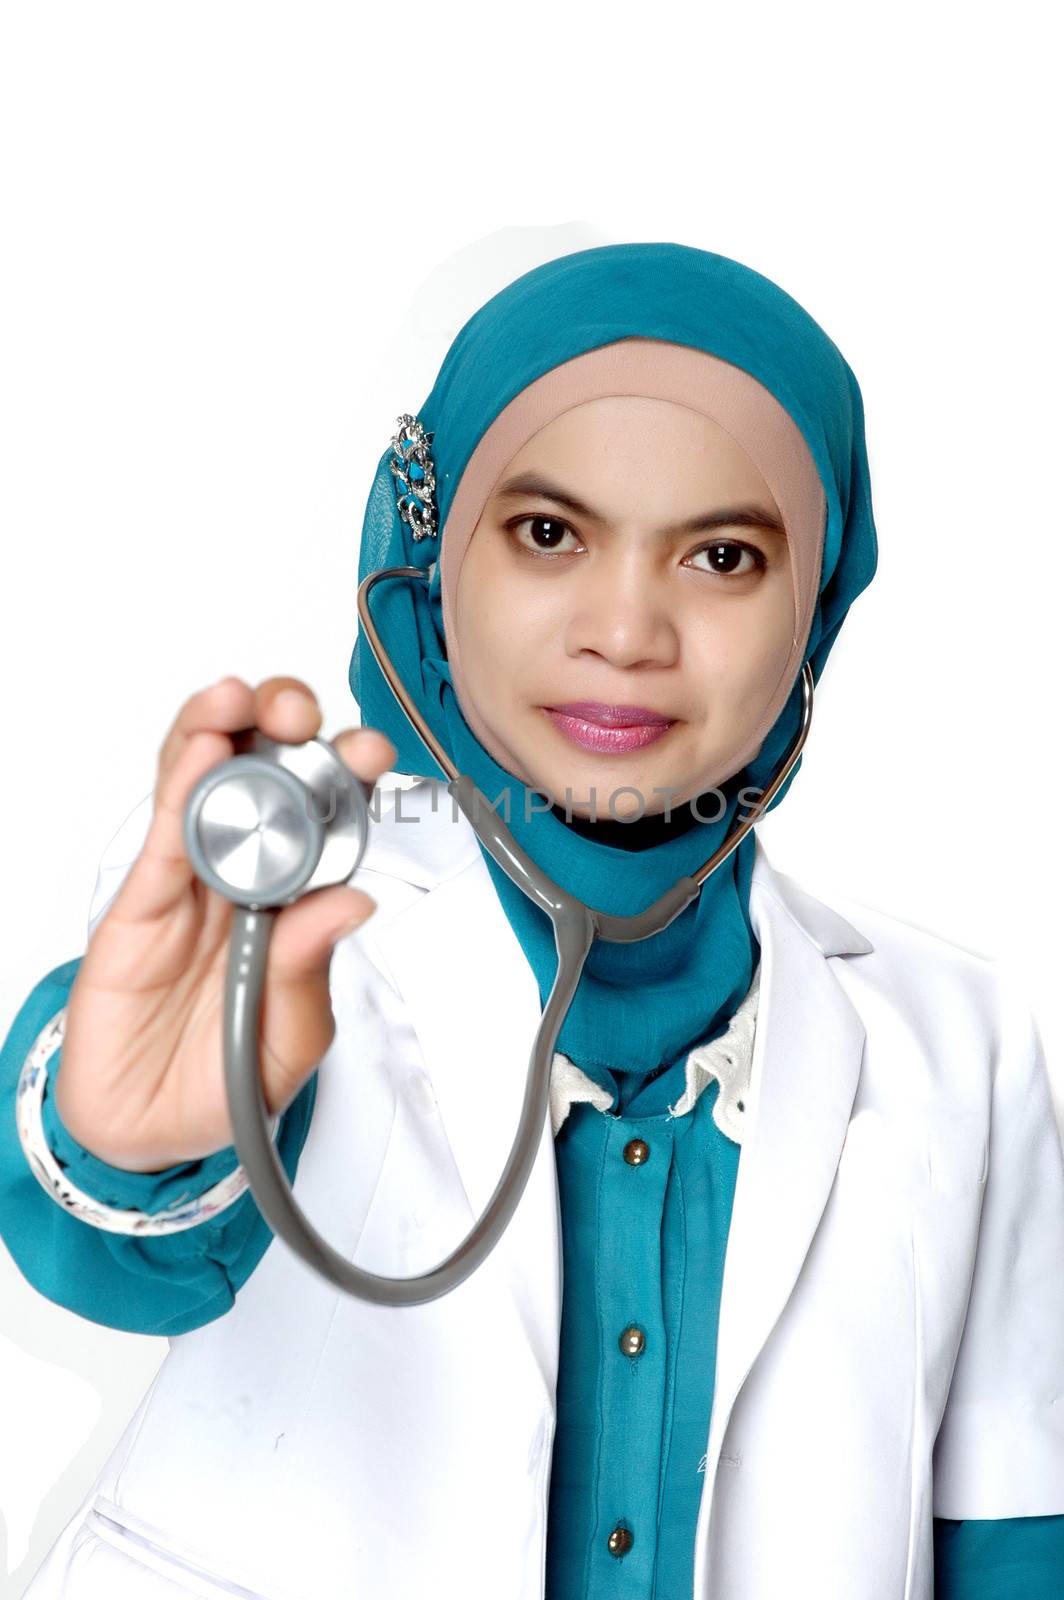 Asian young woman doctor holding a stethoscope on white background